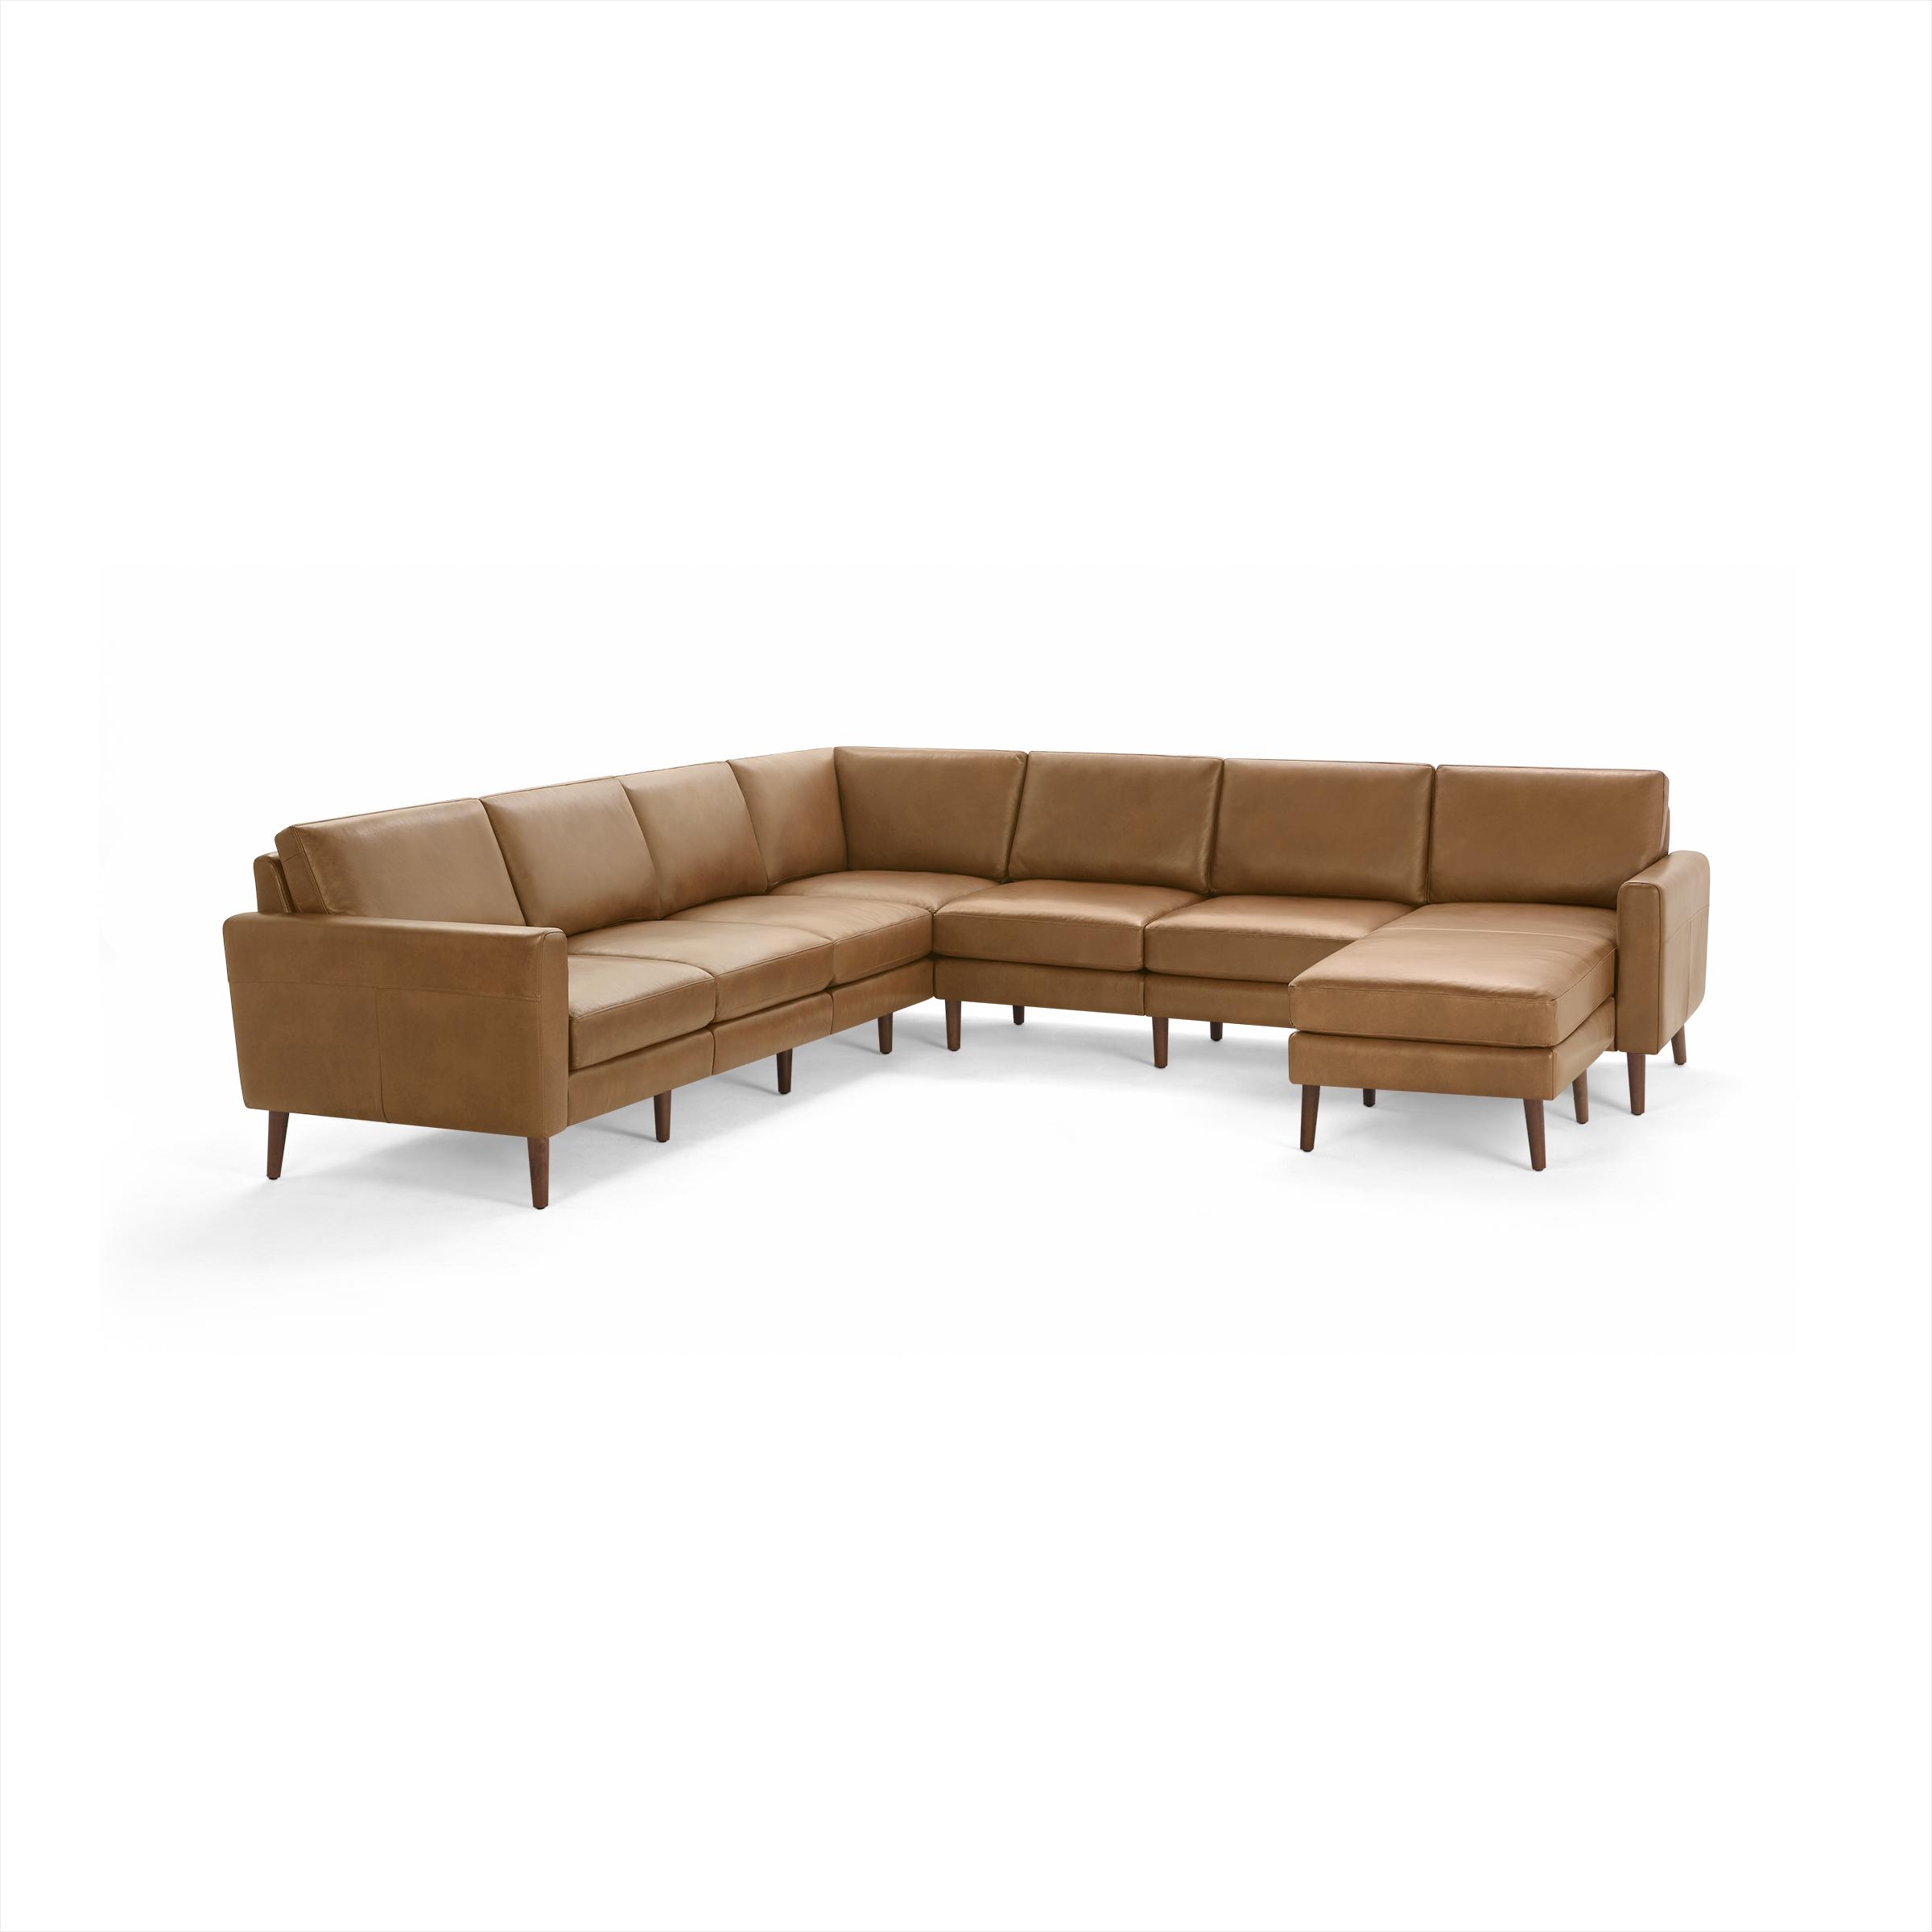 The Nomad Leather 7-Seat Corner Sectional with Chaise in Camel, Walnut Legs - Image 1